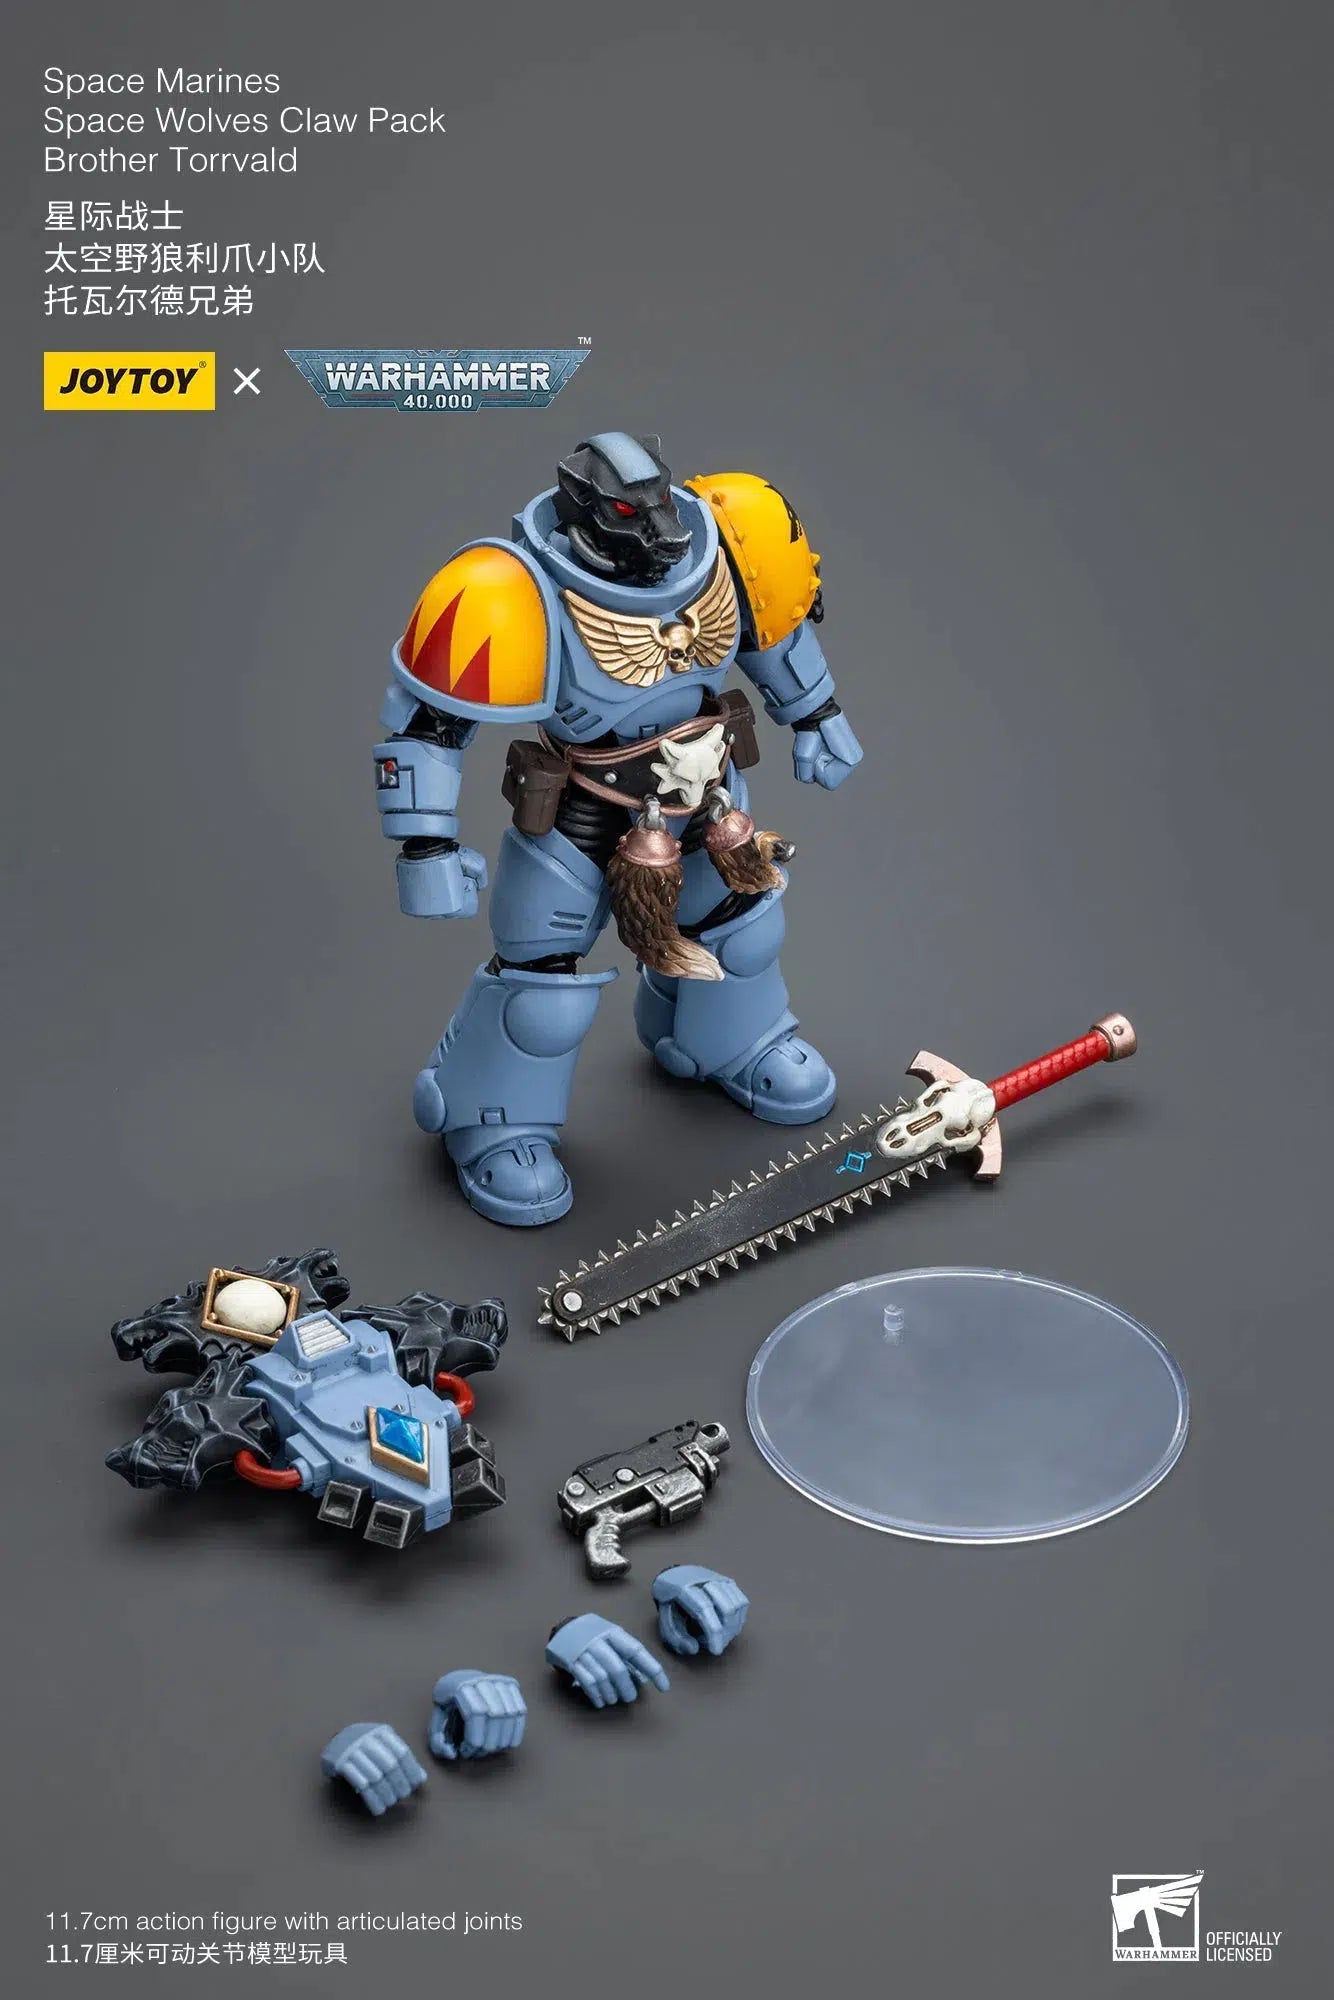 Warhammer 40K: Space Wolves: Claw Pack: Brother Torrvald Joy Toy